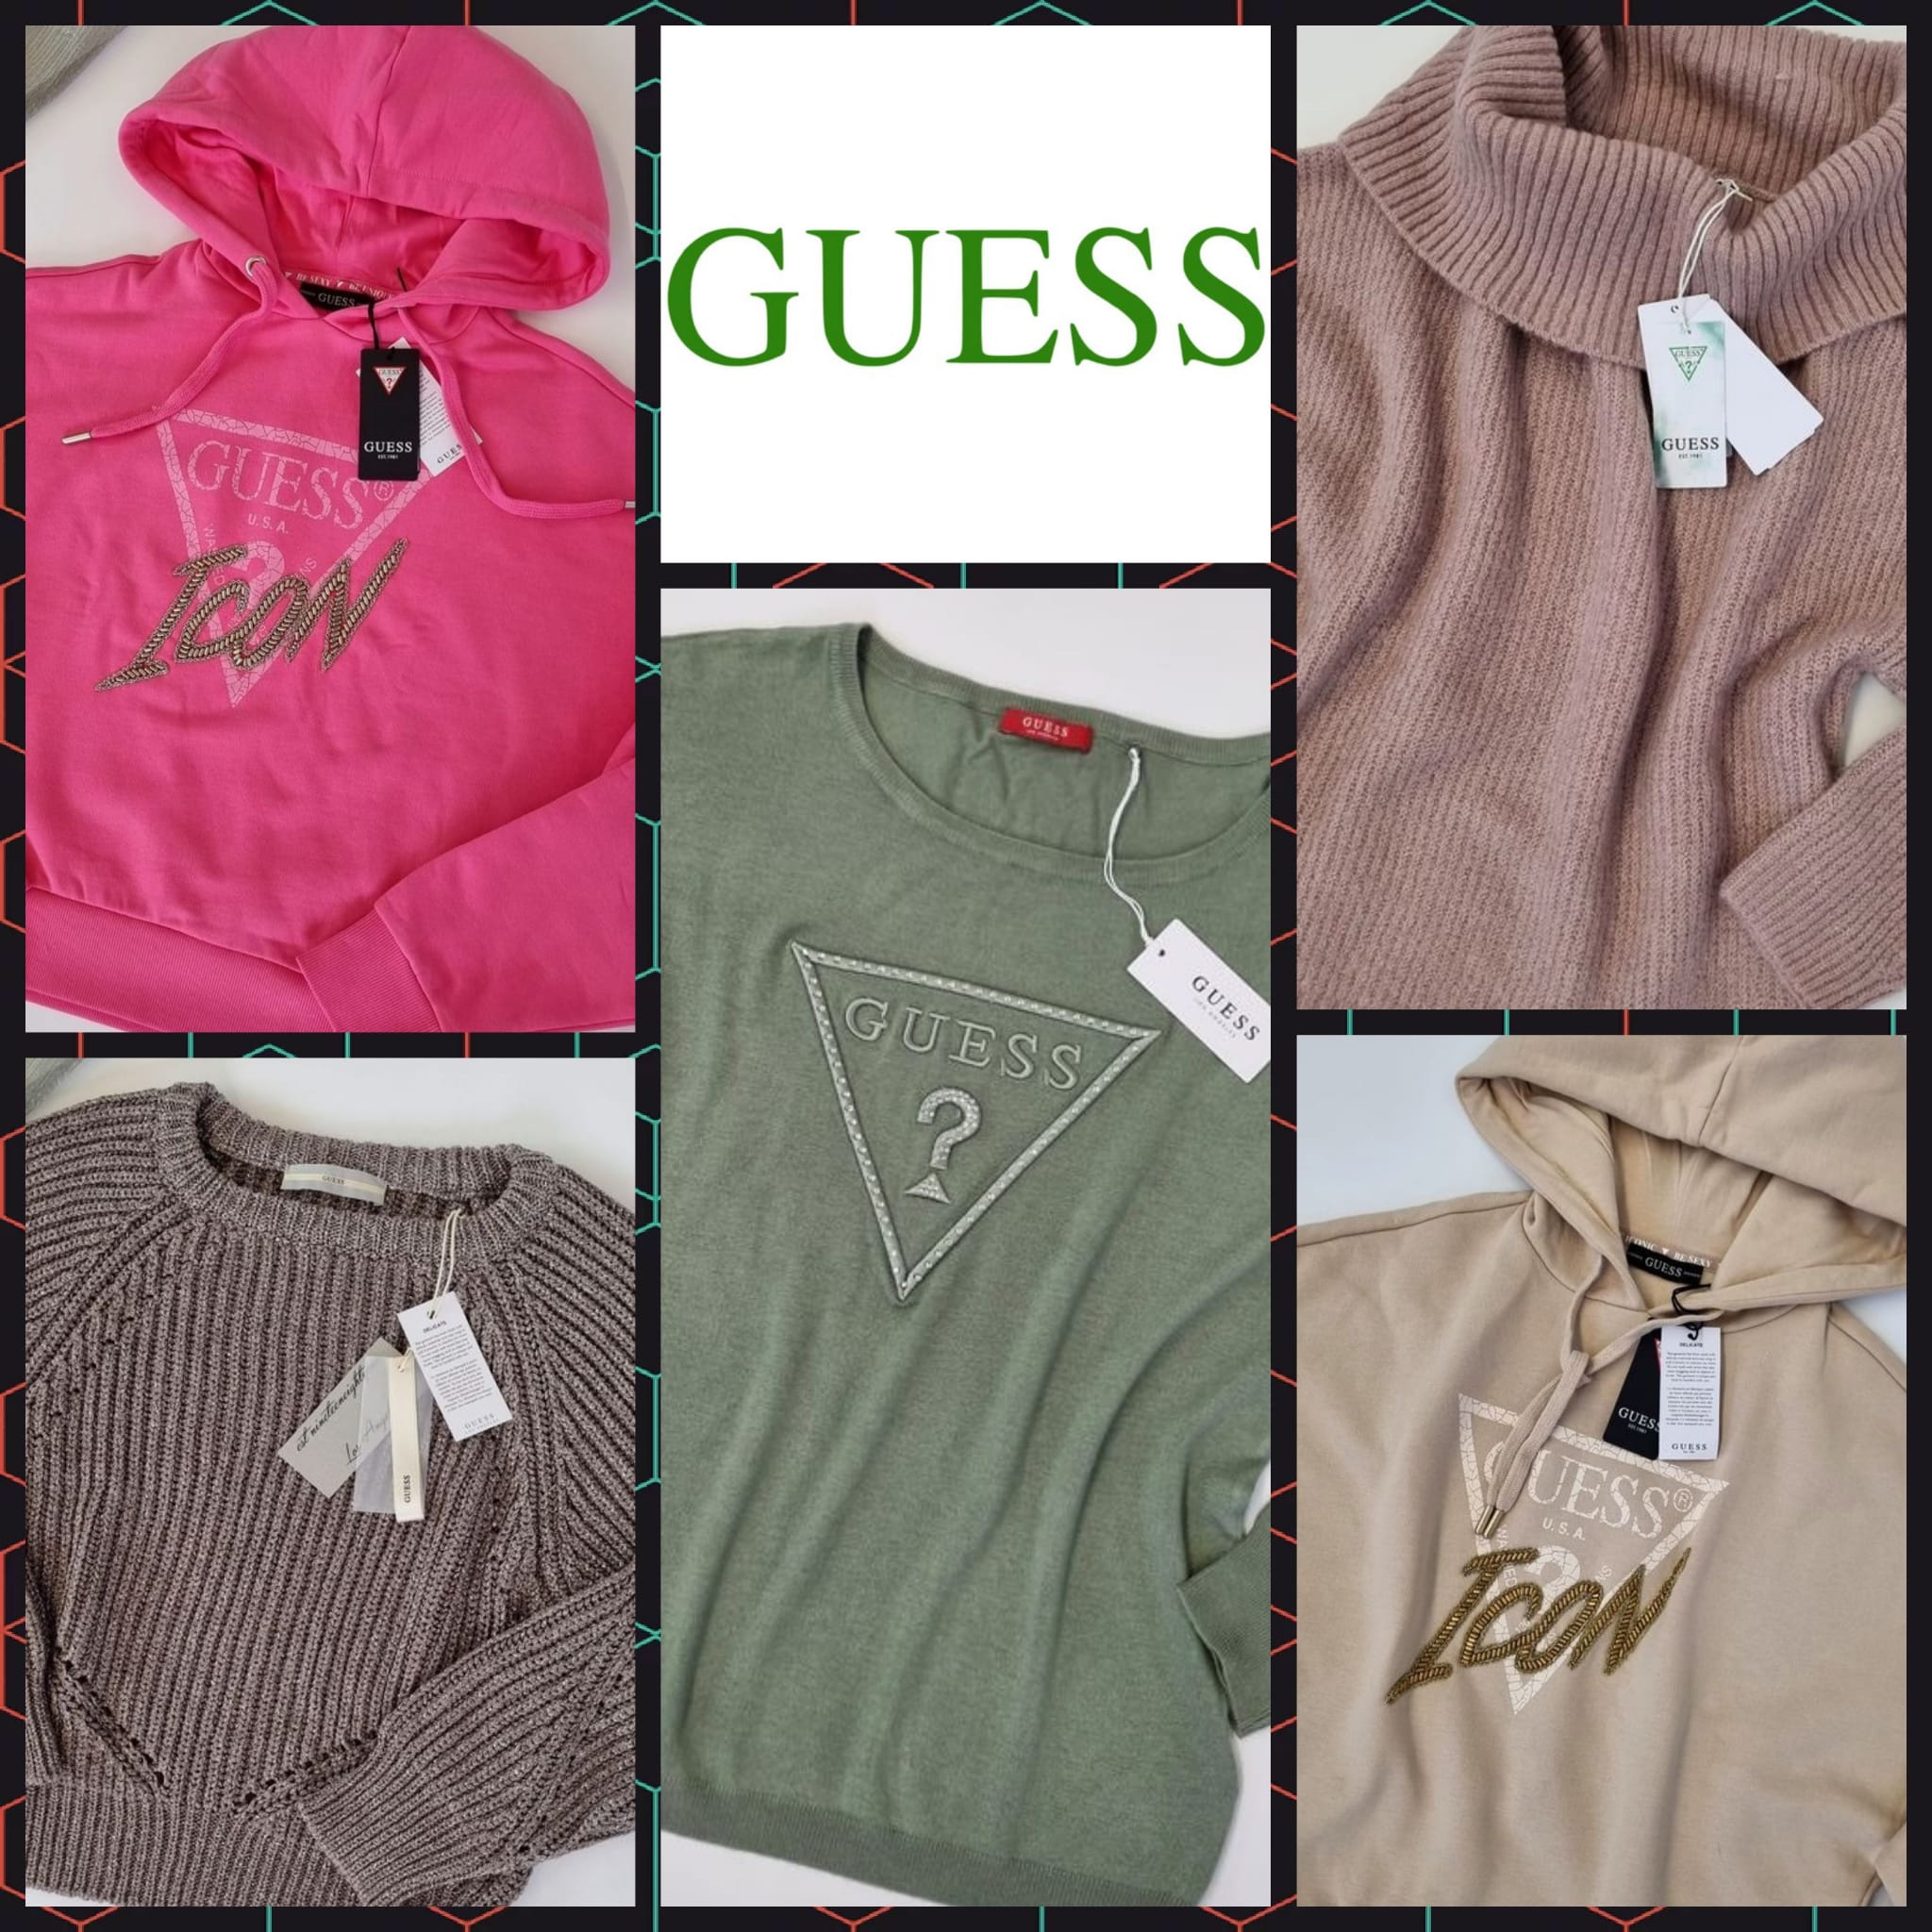 Mix of jumpers and hoodies from Guess